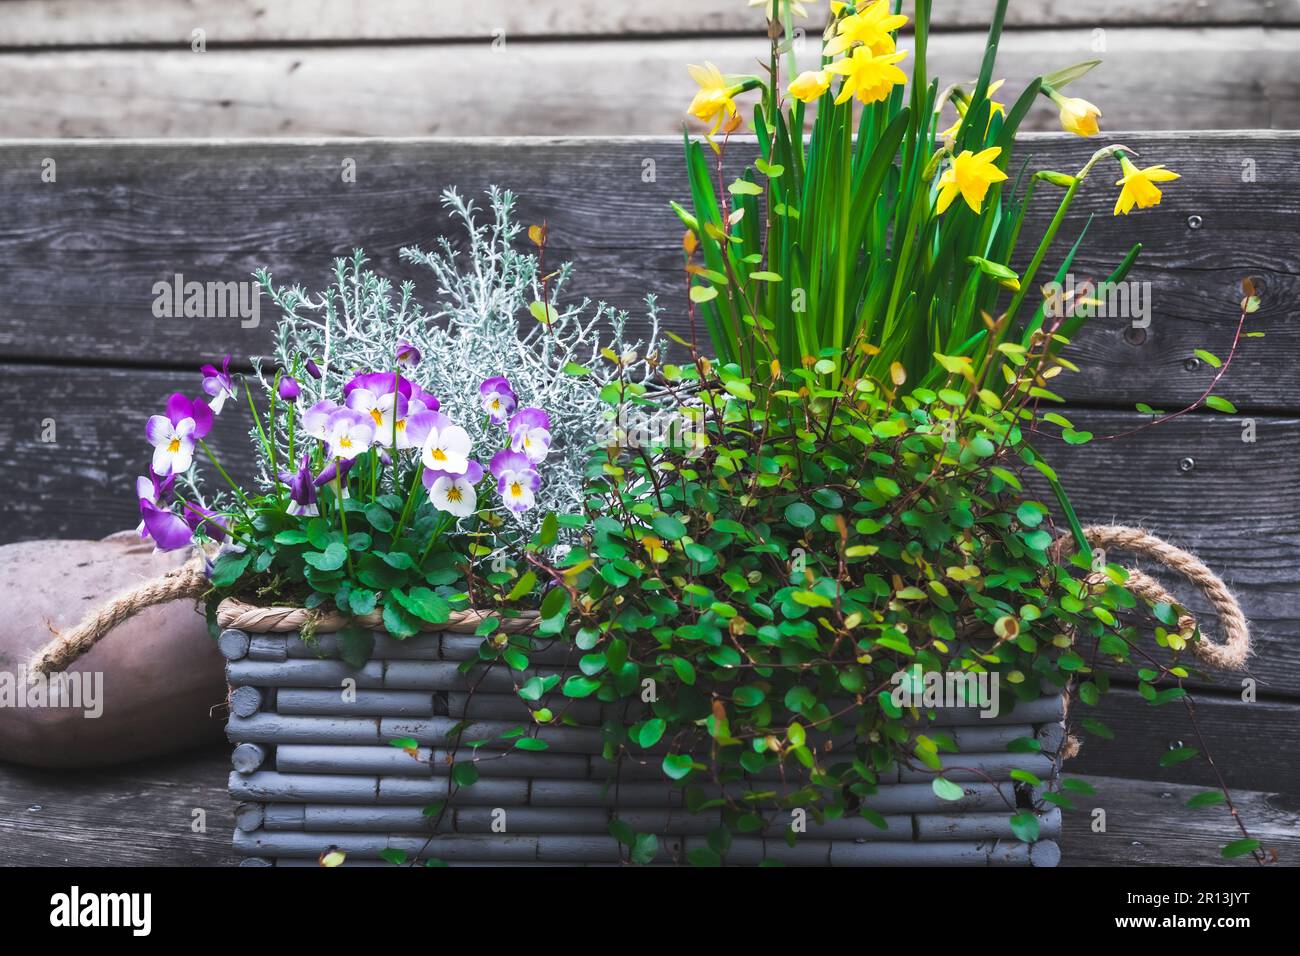 Gray wooden flower box with winter and spring plants. Leucophyta brownii, daffodils, muehlenbeckia axillaris and pansies Stock Photo